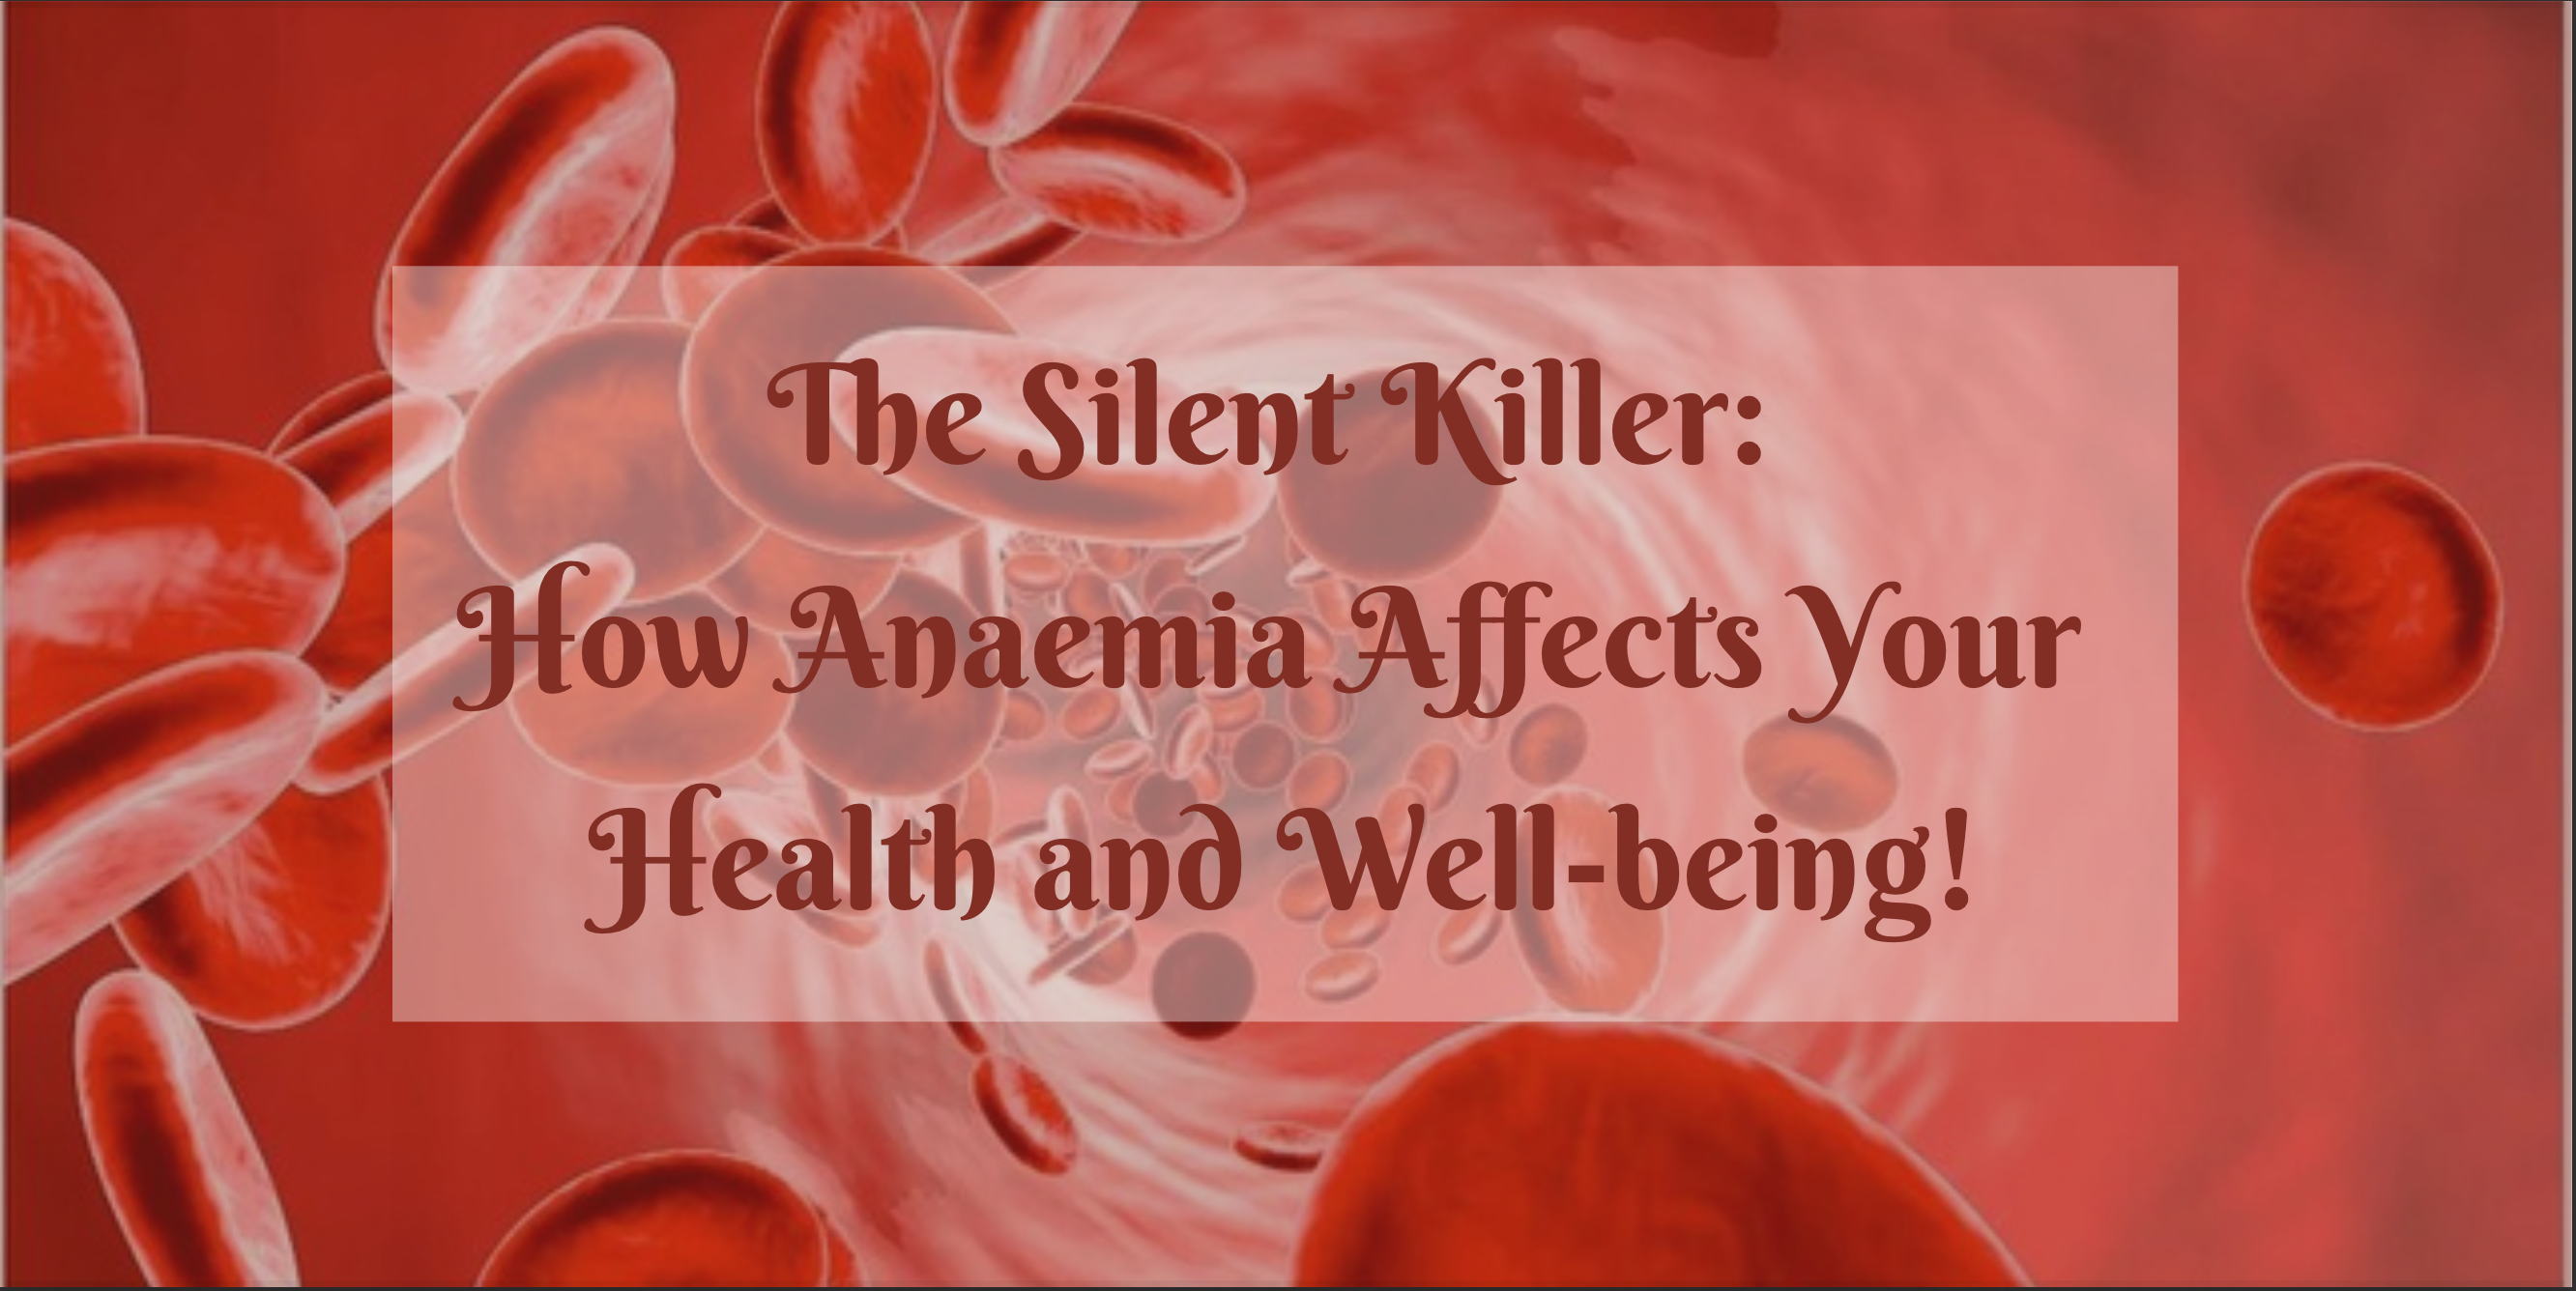 The Silent Killer: How Anaemia Affects Your Health and Well-being